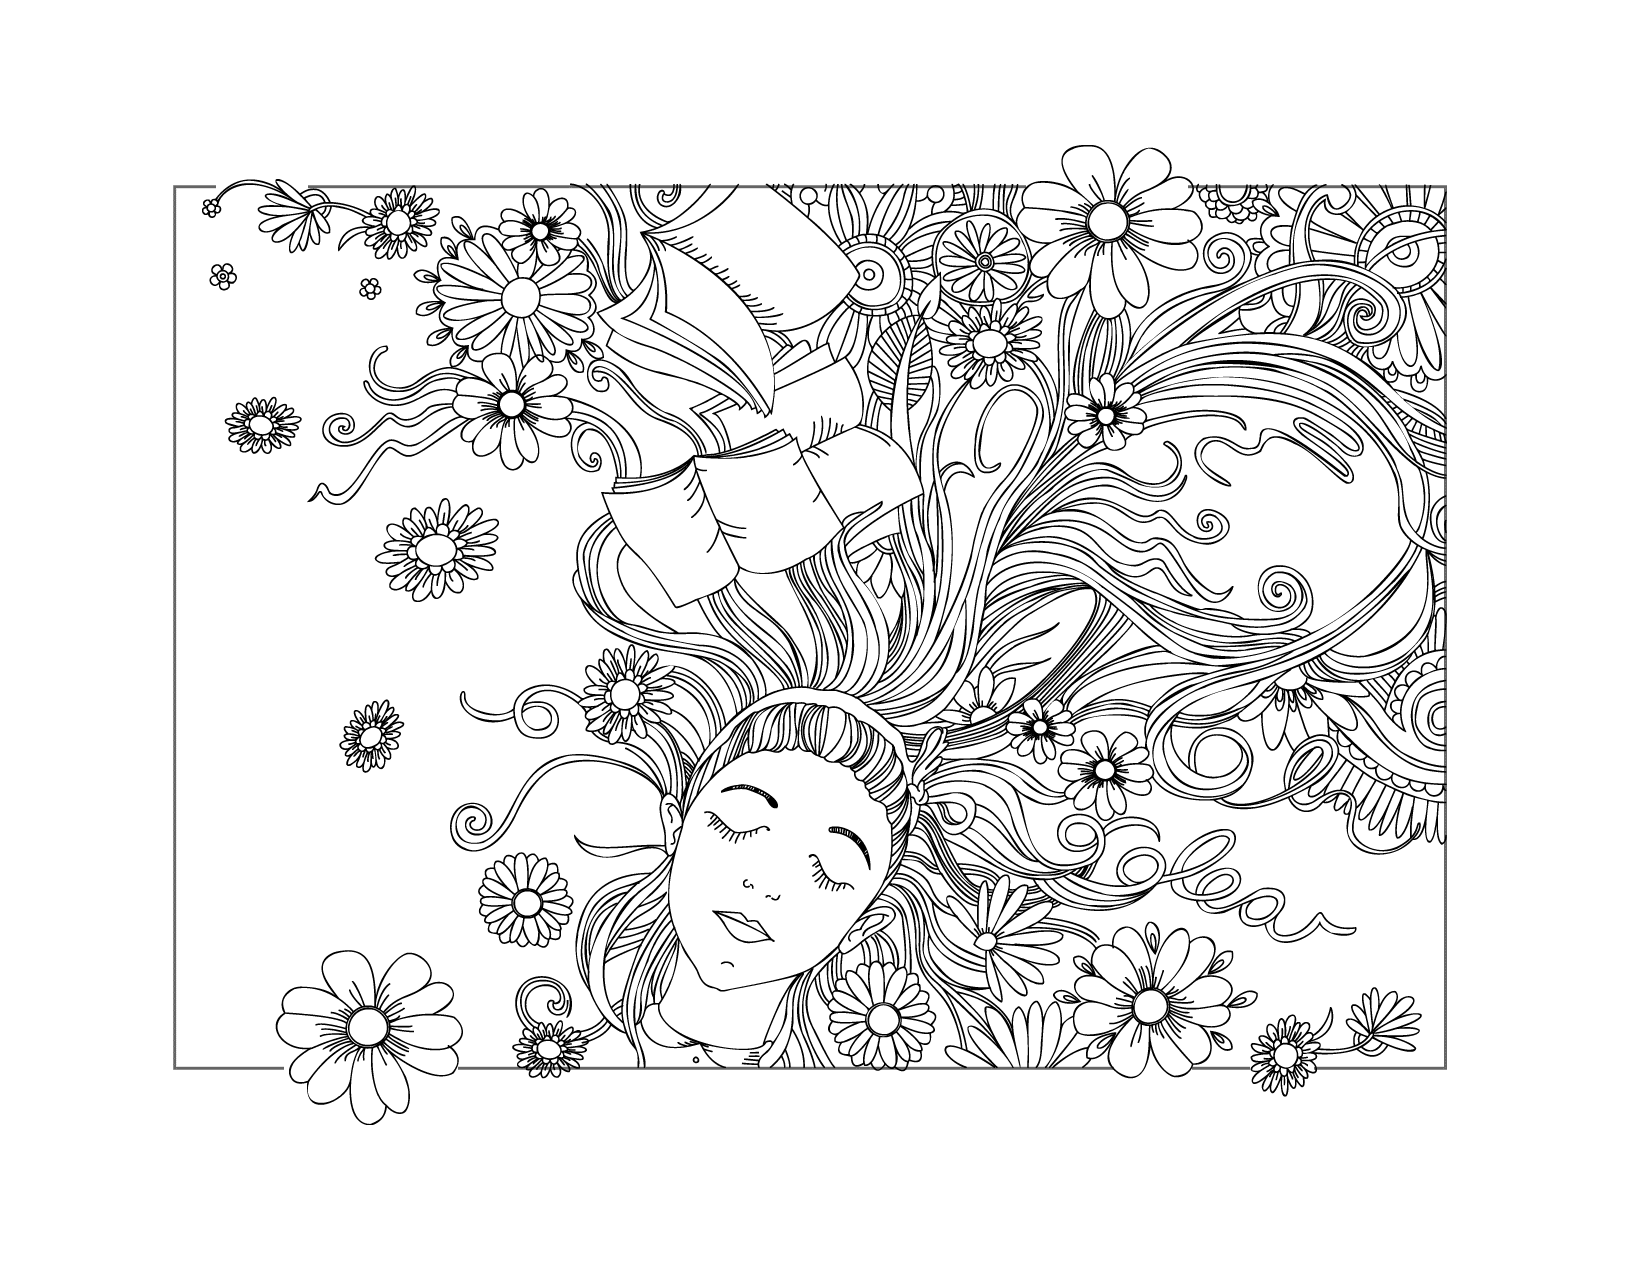 Alice In Wonderland Art Coloring Page